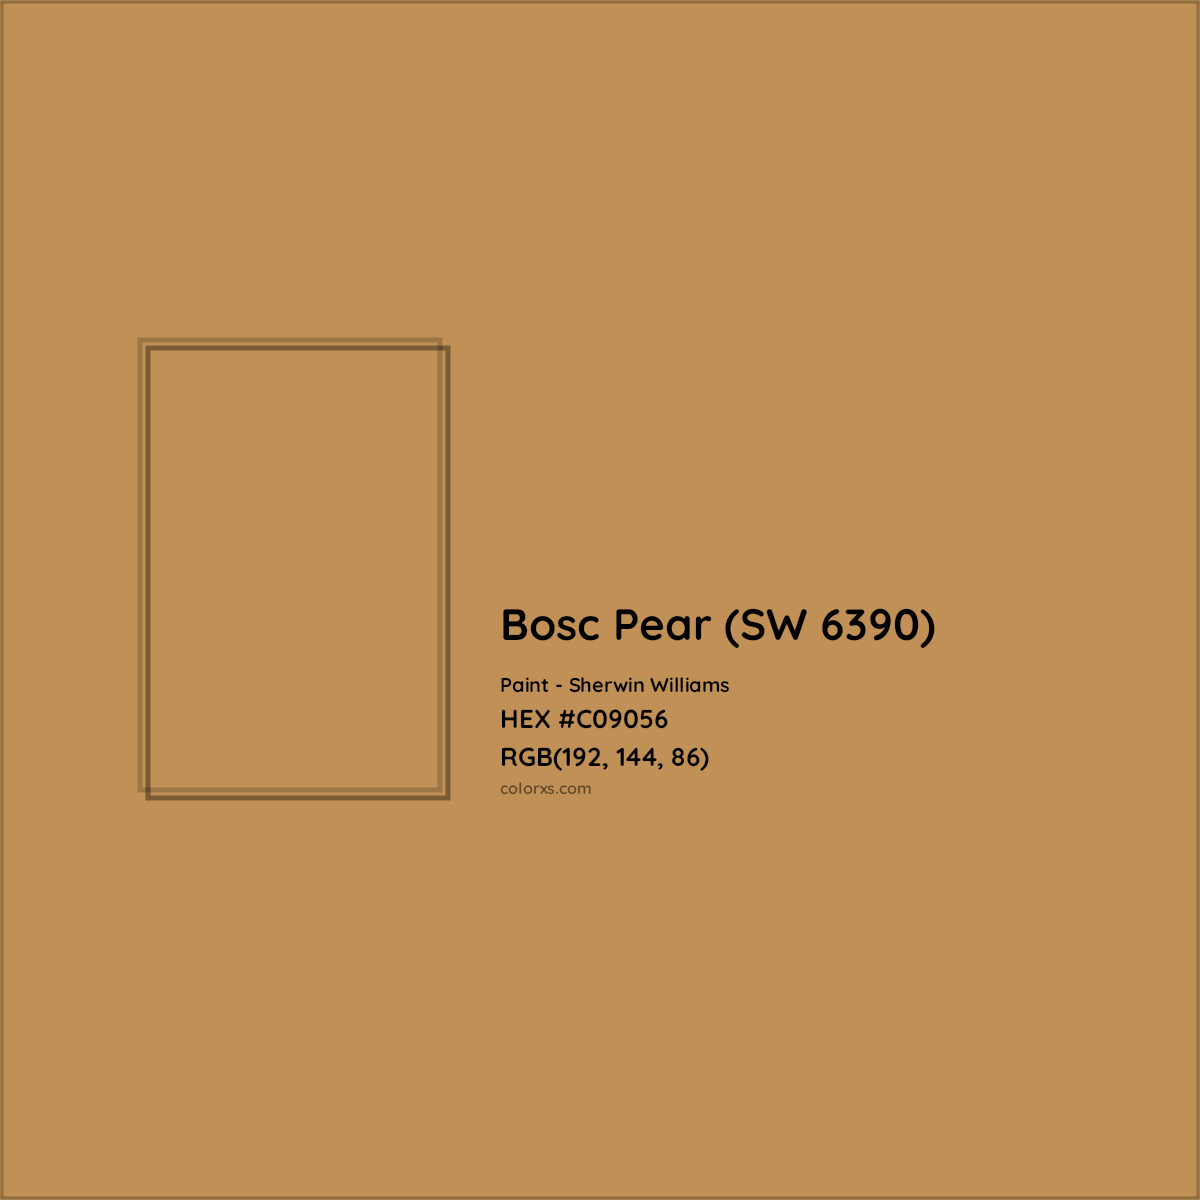 HEX #C09056 Bosc Pear (SW 6390) Paint Sherwin Williams - Color Code